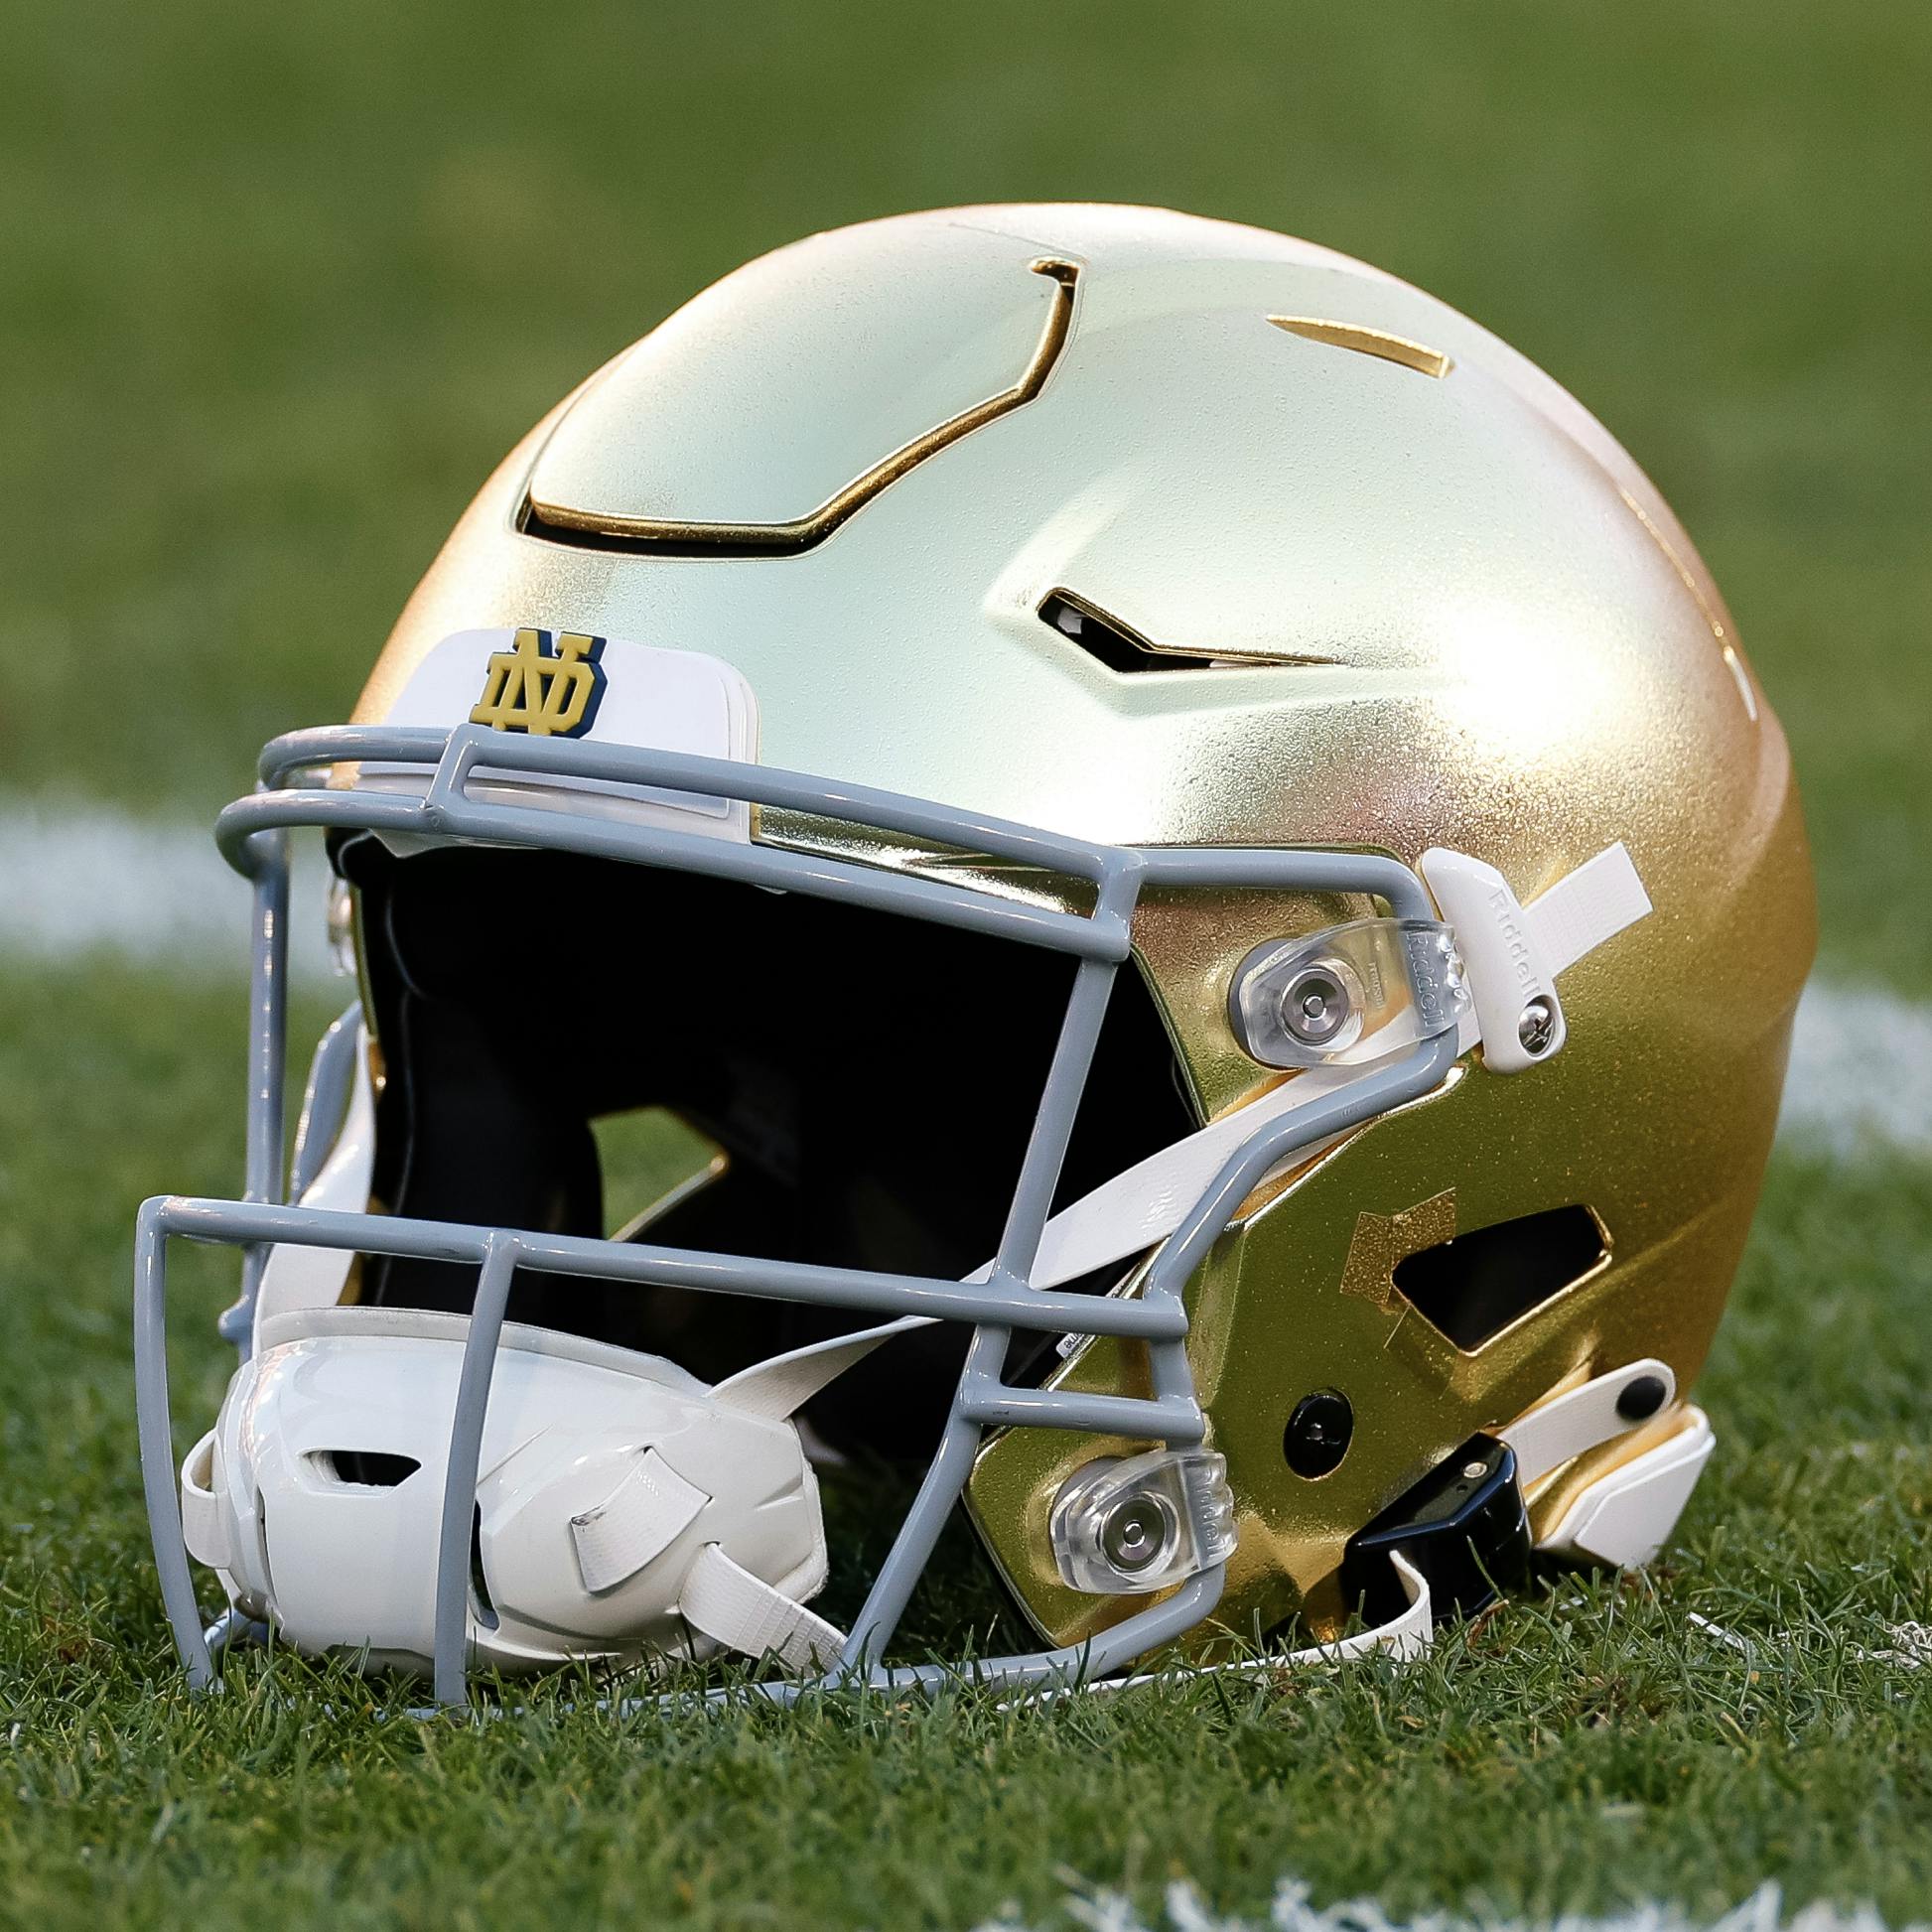 Let's talk about Notre Dame Football and the transfer portal